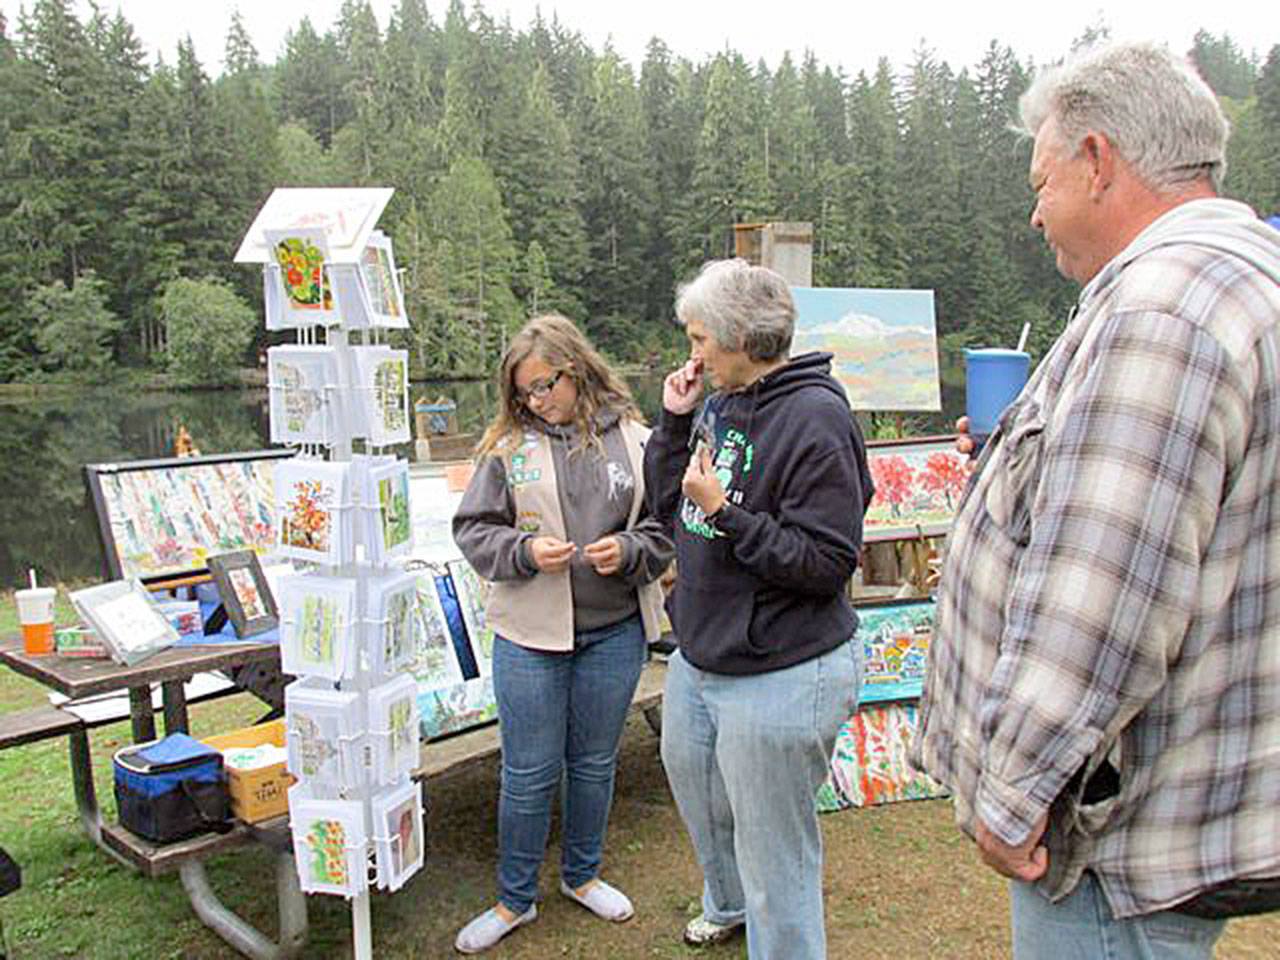 The artist and food vendors will return this year for the Lake Sylvia Fall Festival on Saturday at the state park. (Courtesy Helen Hepp)                                The artist and food vendors will return this year for Lake Sylvia State Park Fall Festival, 7 a.m. to 4 p.m., Saturday, Sept. 15, 2018, at the park. Photo Courtesy of Helen Hepp.